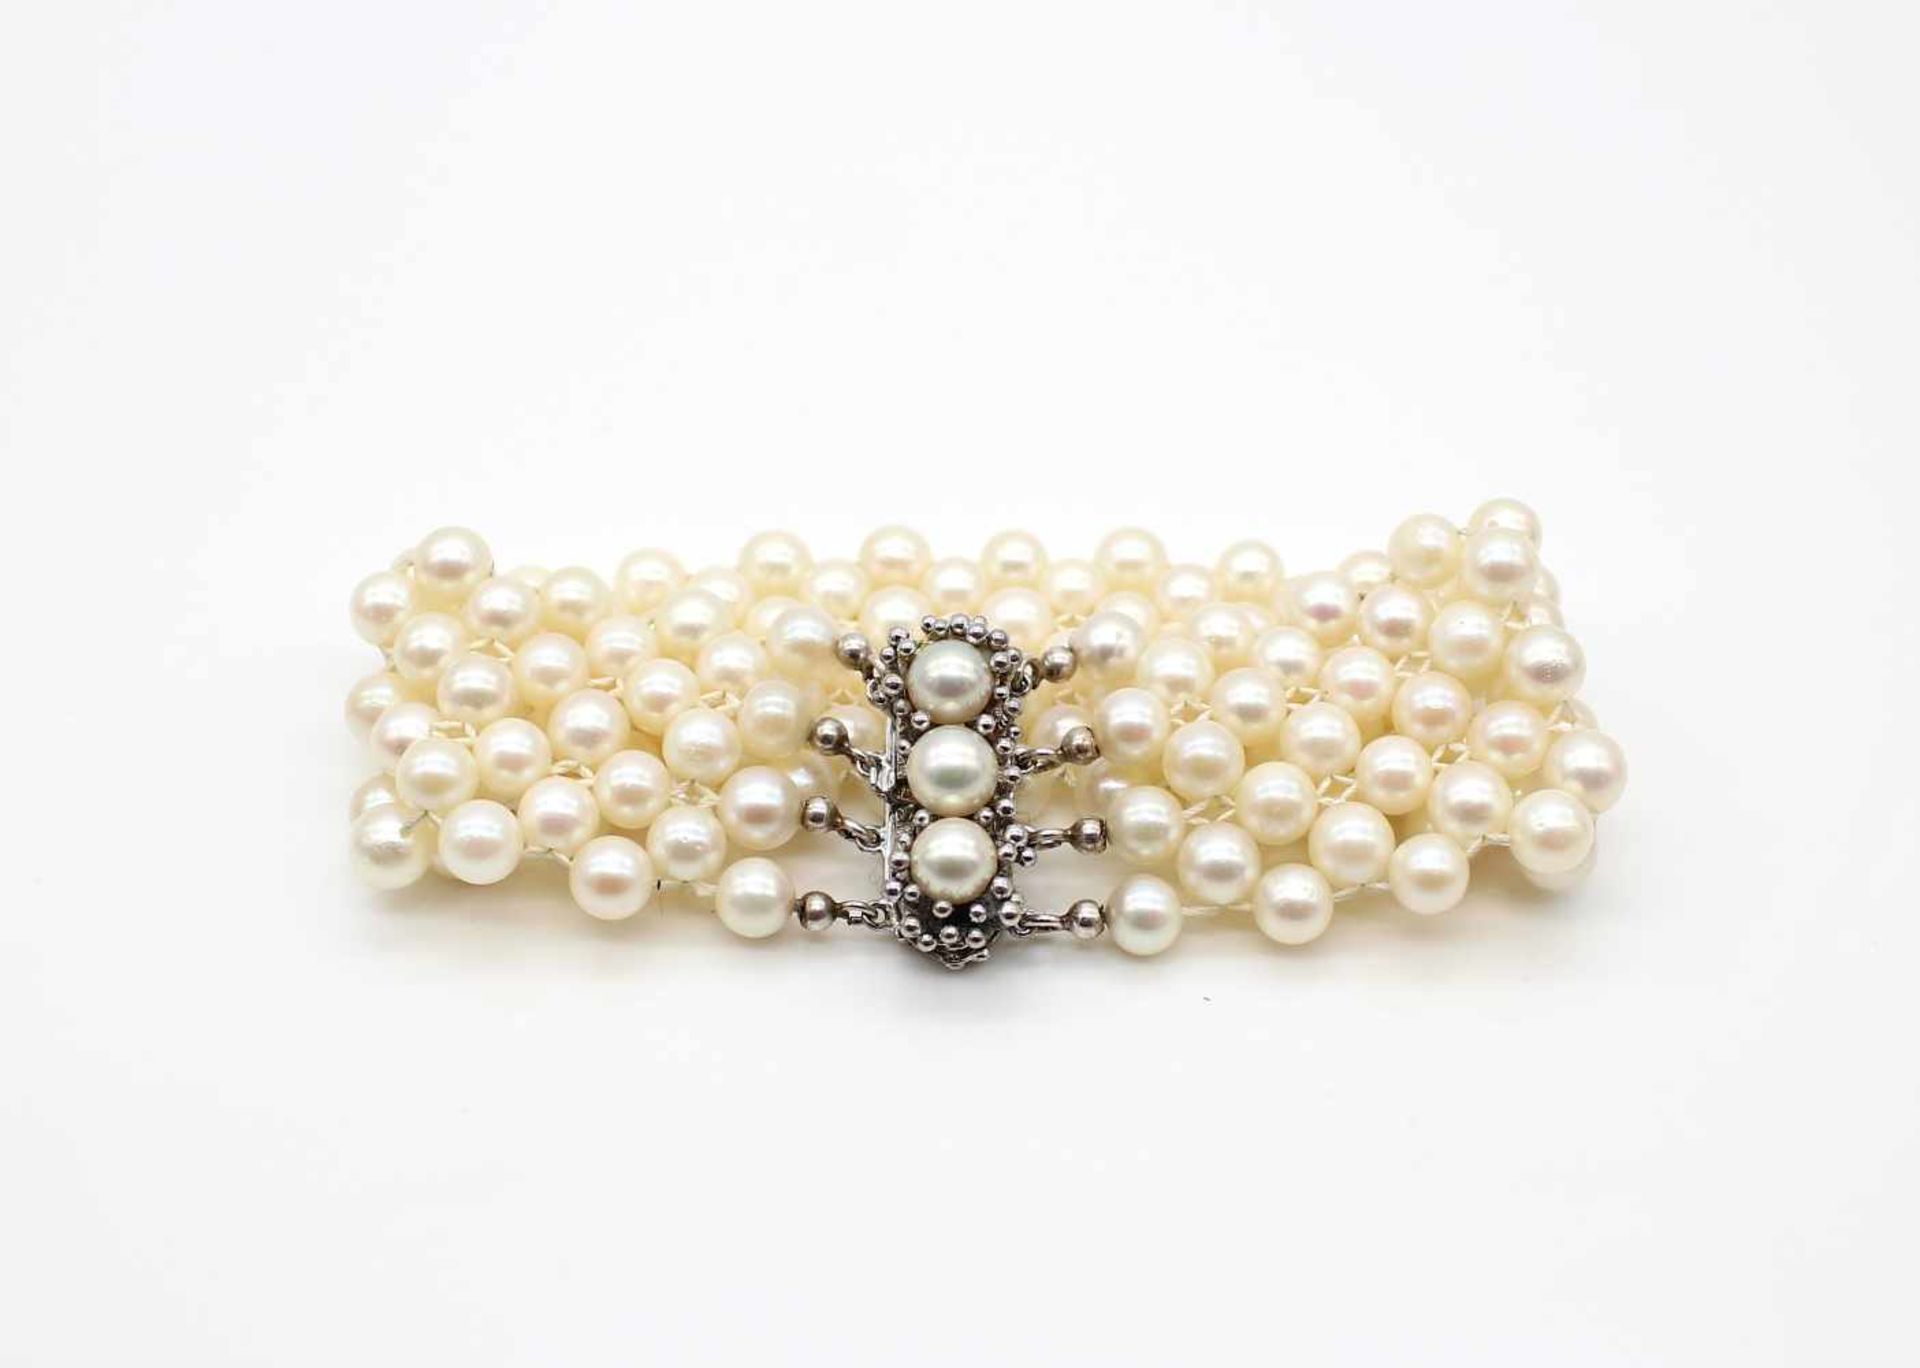 Bracelet made of cultured pearls with a lock made of 585 white gold.weight 53,2 g, length 20 - Bild 3 aus 3